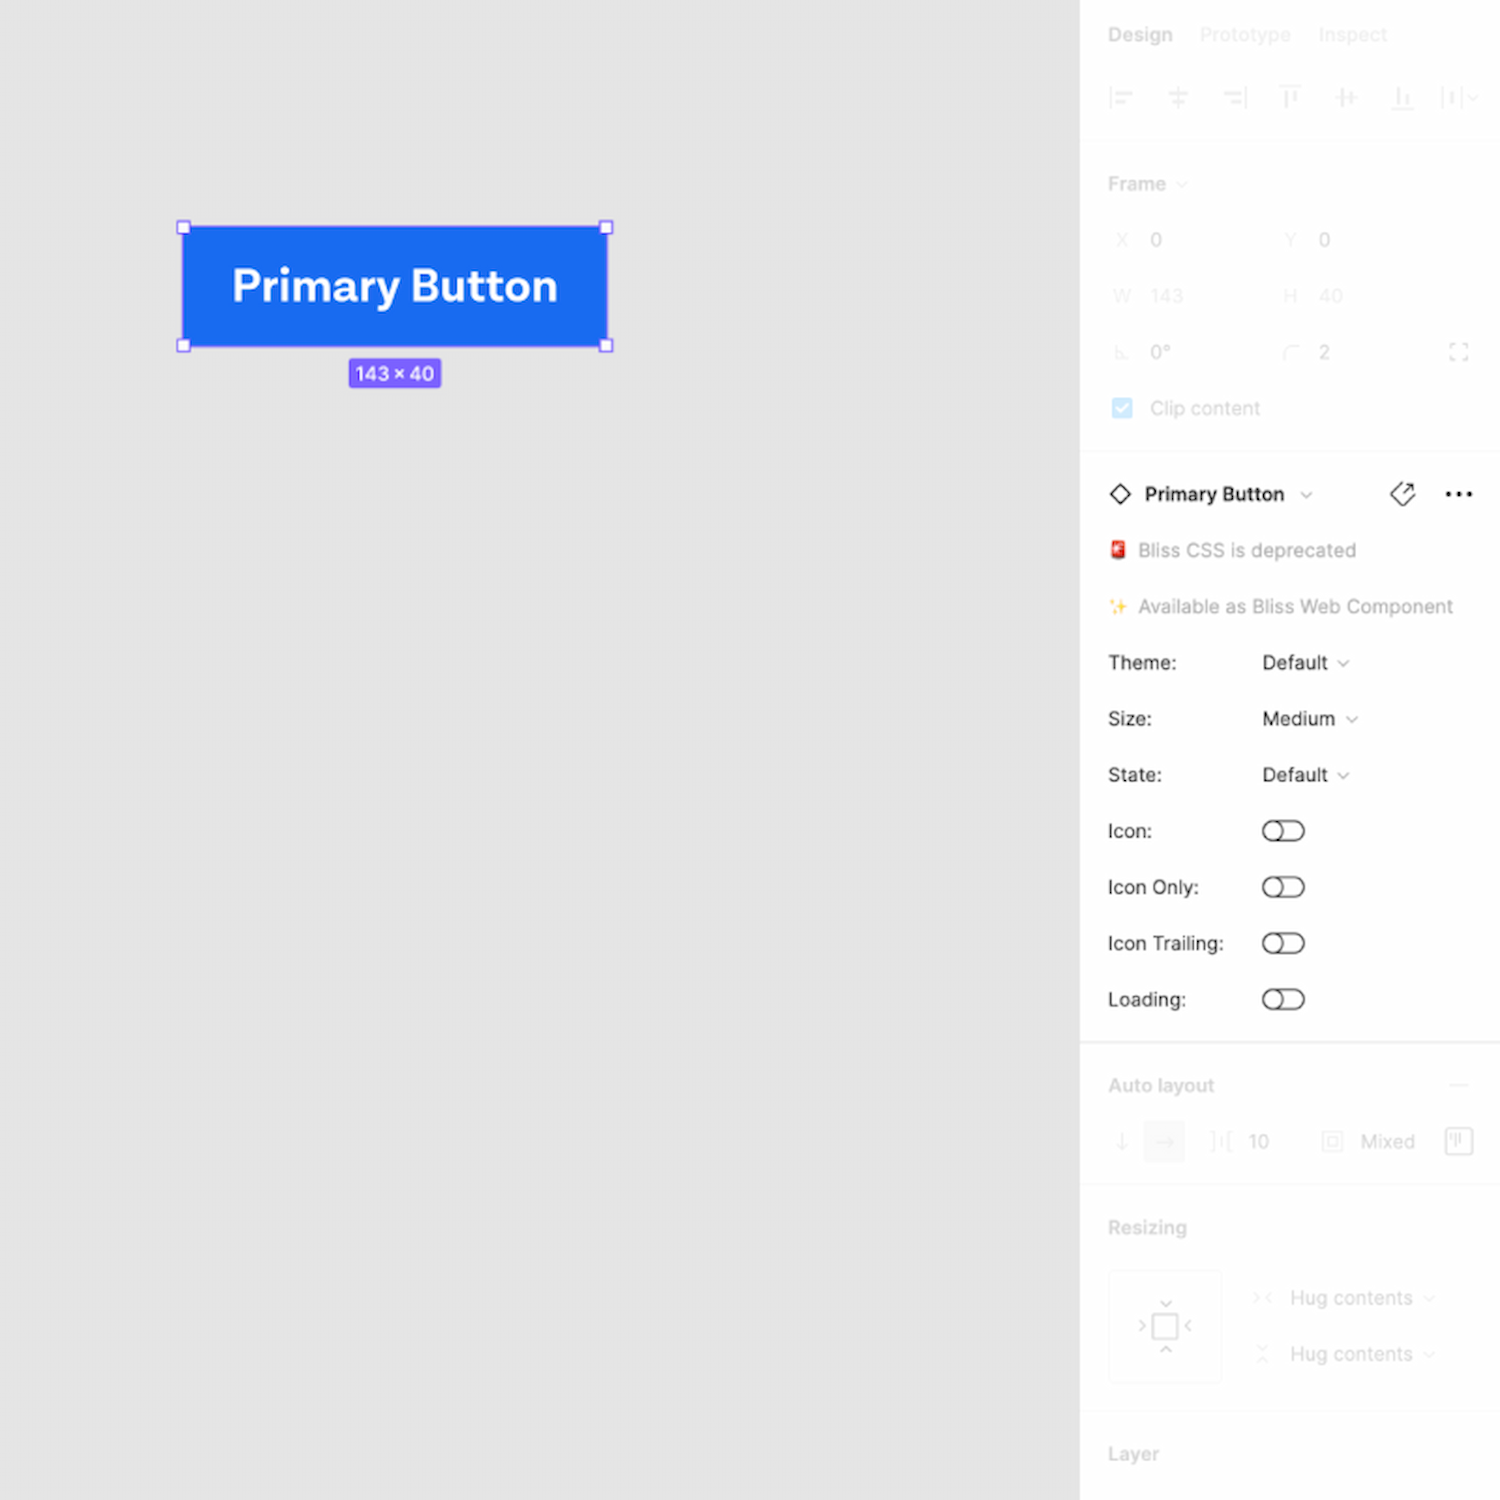 Screenshot from Figma showing the button component with the variant sidebar and additional information.